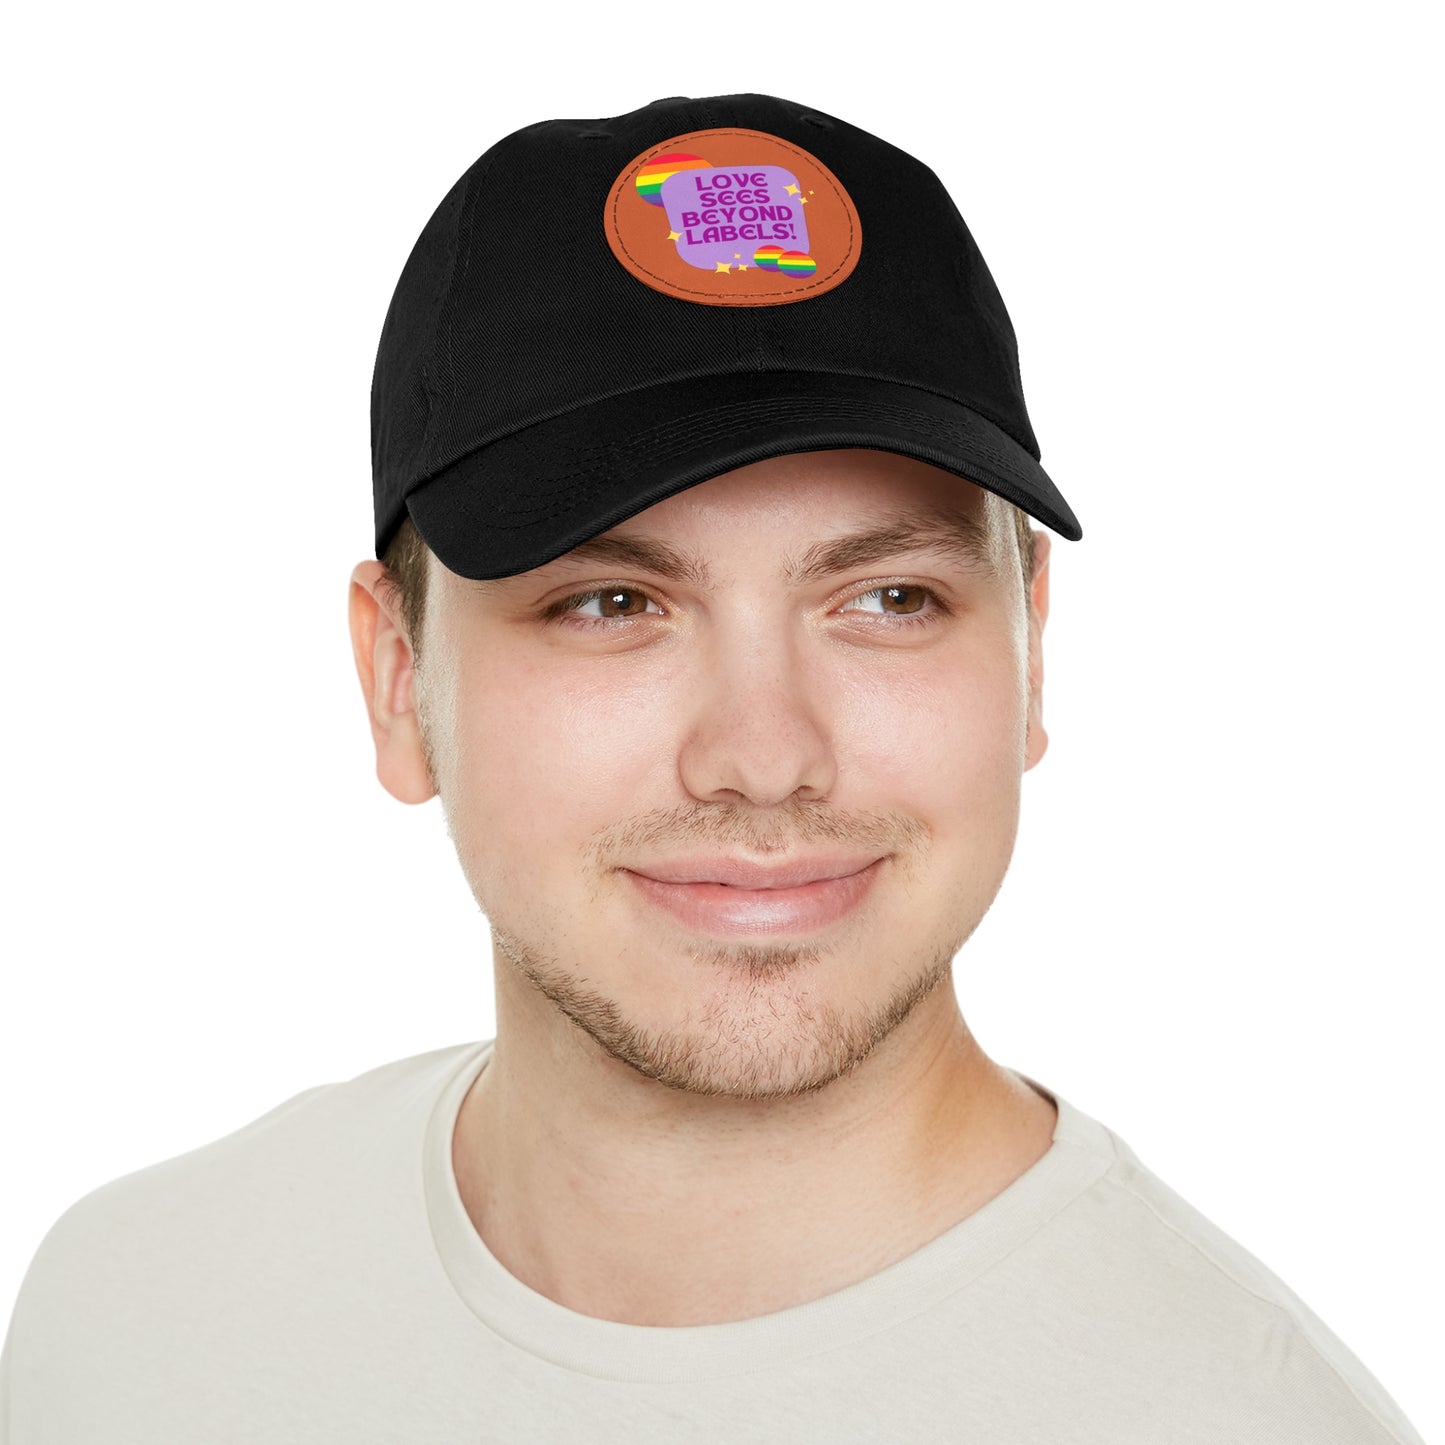 PRIDE LGBTQ Dad Hat with Leather Patch